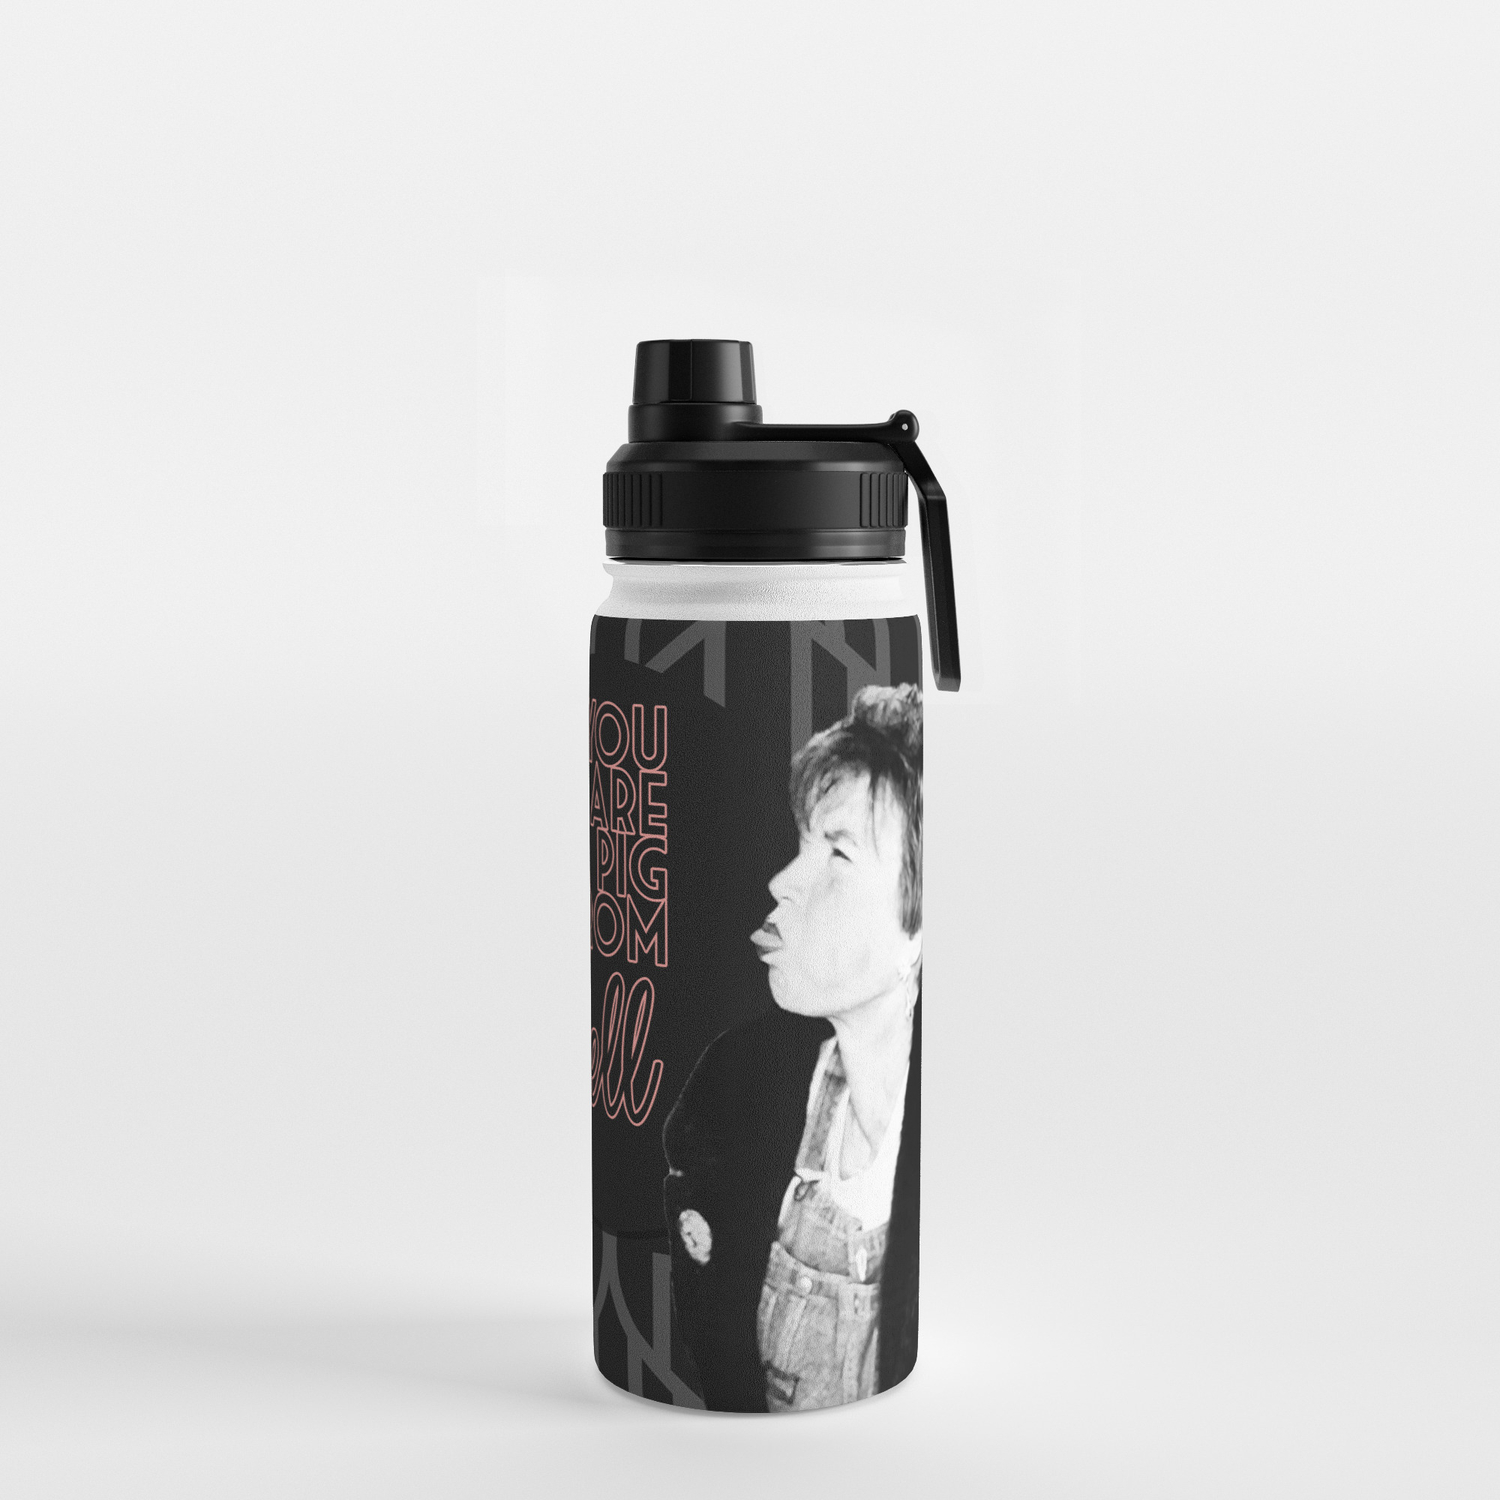 Ouiser Pig from Hell Steel Magnolias Water Bottle by BronzeStarStudio |  Society6